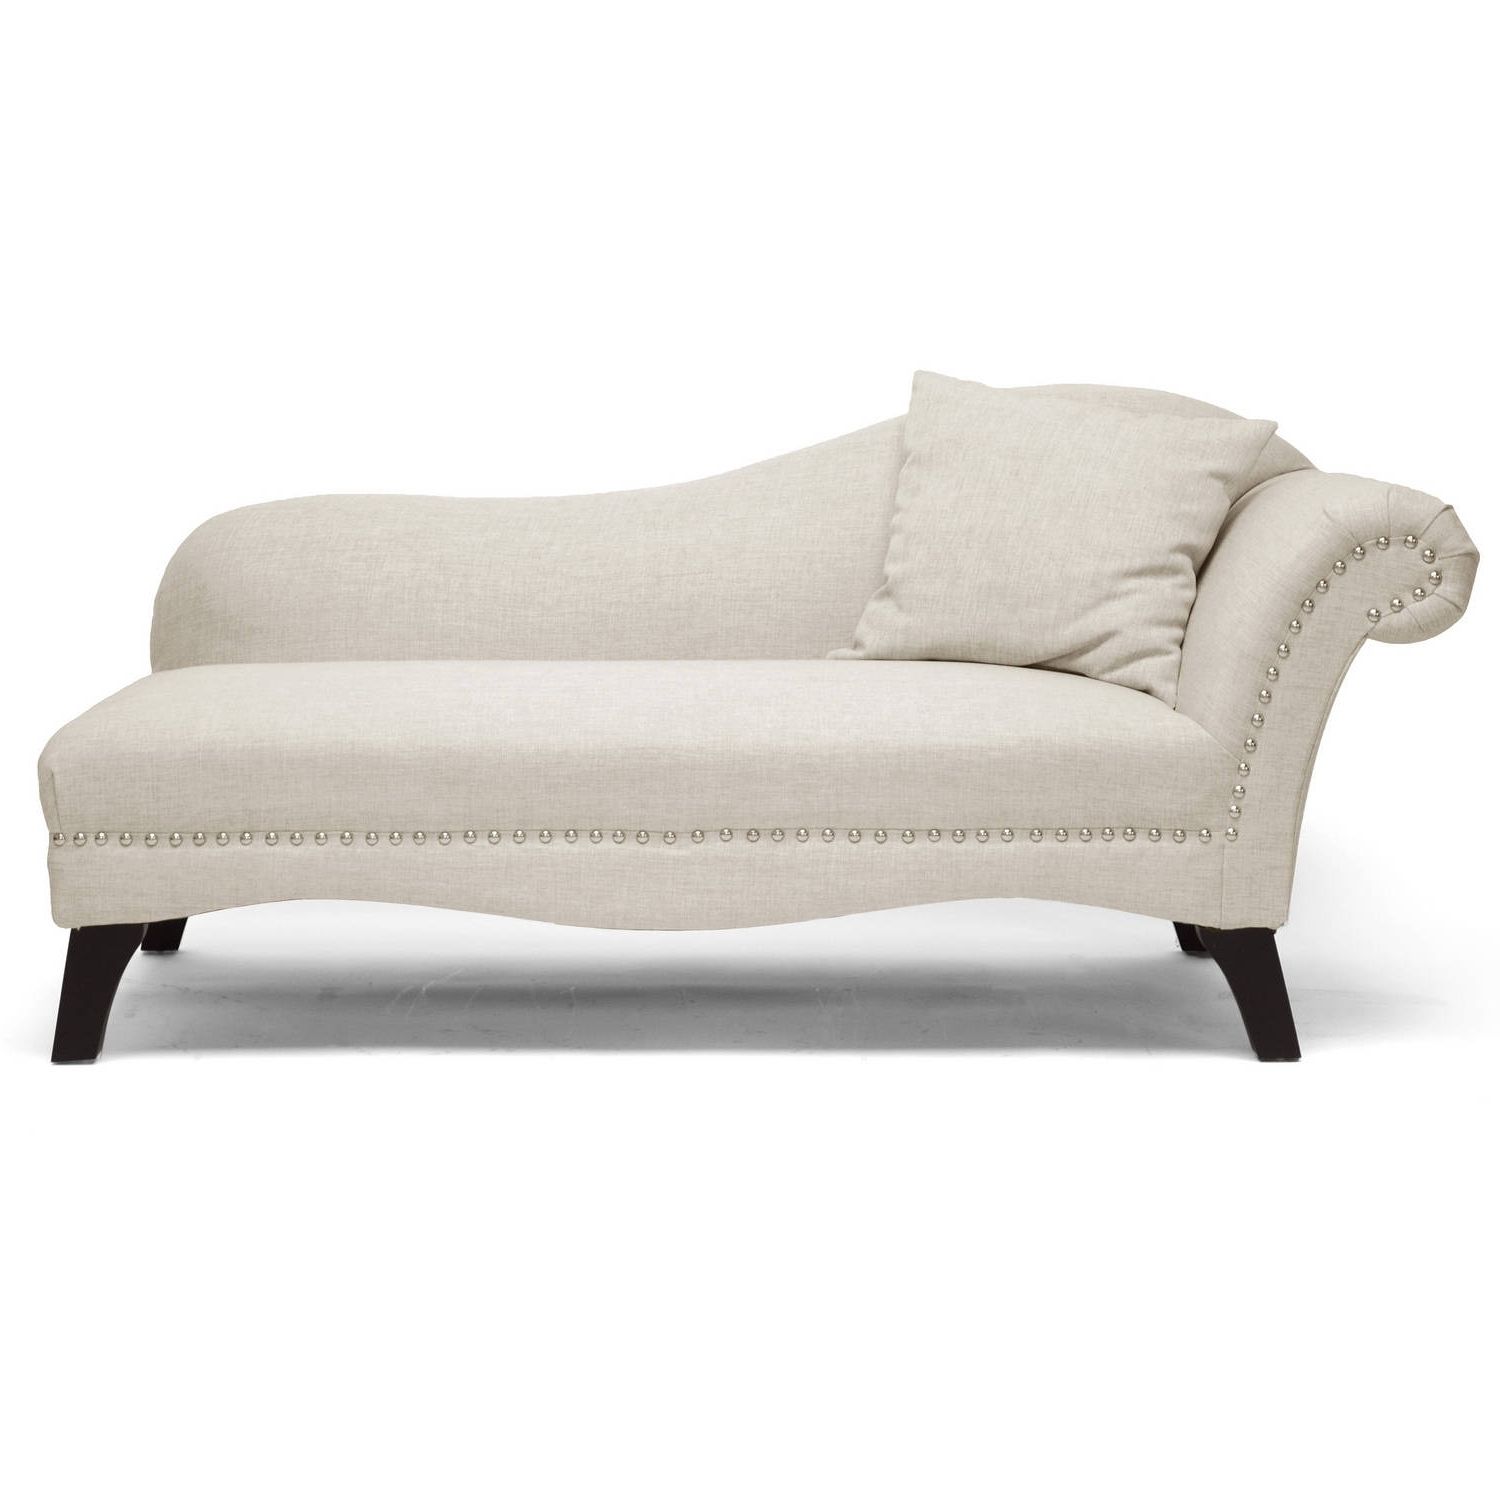 Most Popular Cheap Chaise Lounges Intended For Chaise Lounges – Walmart (Photo 1 of 15)